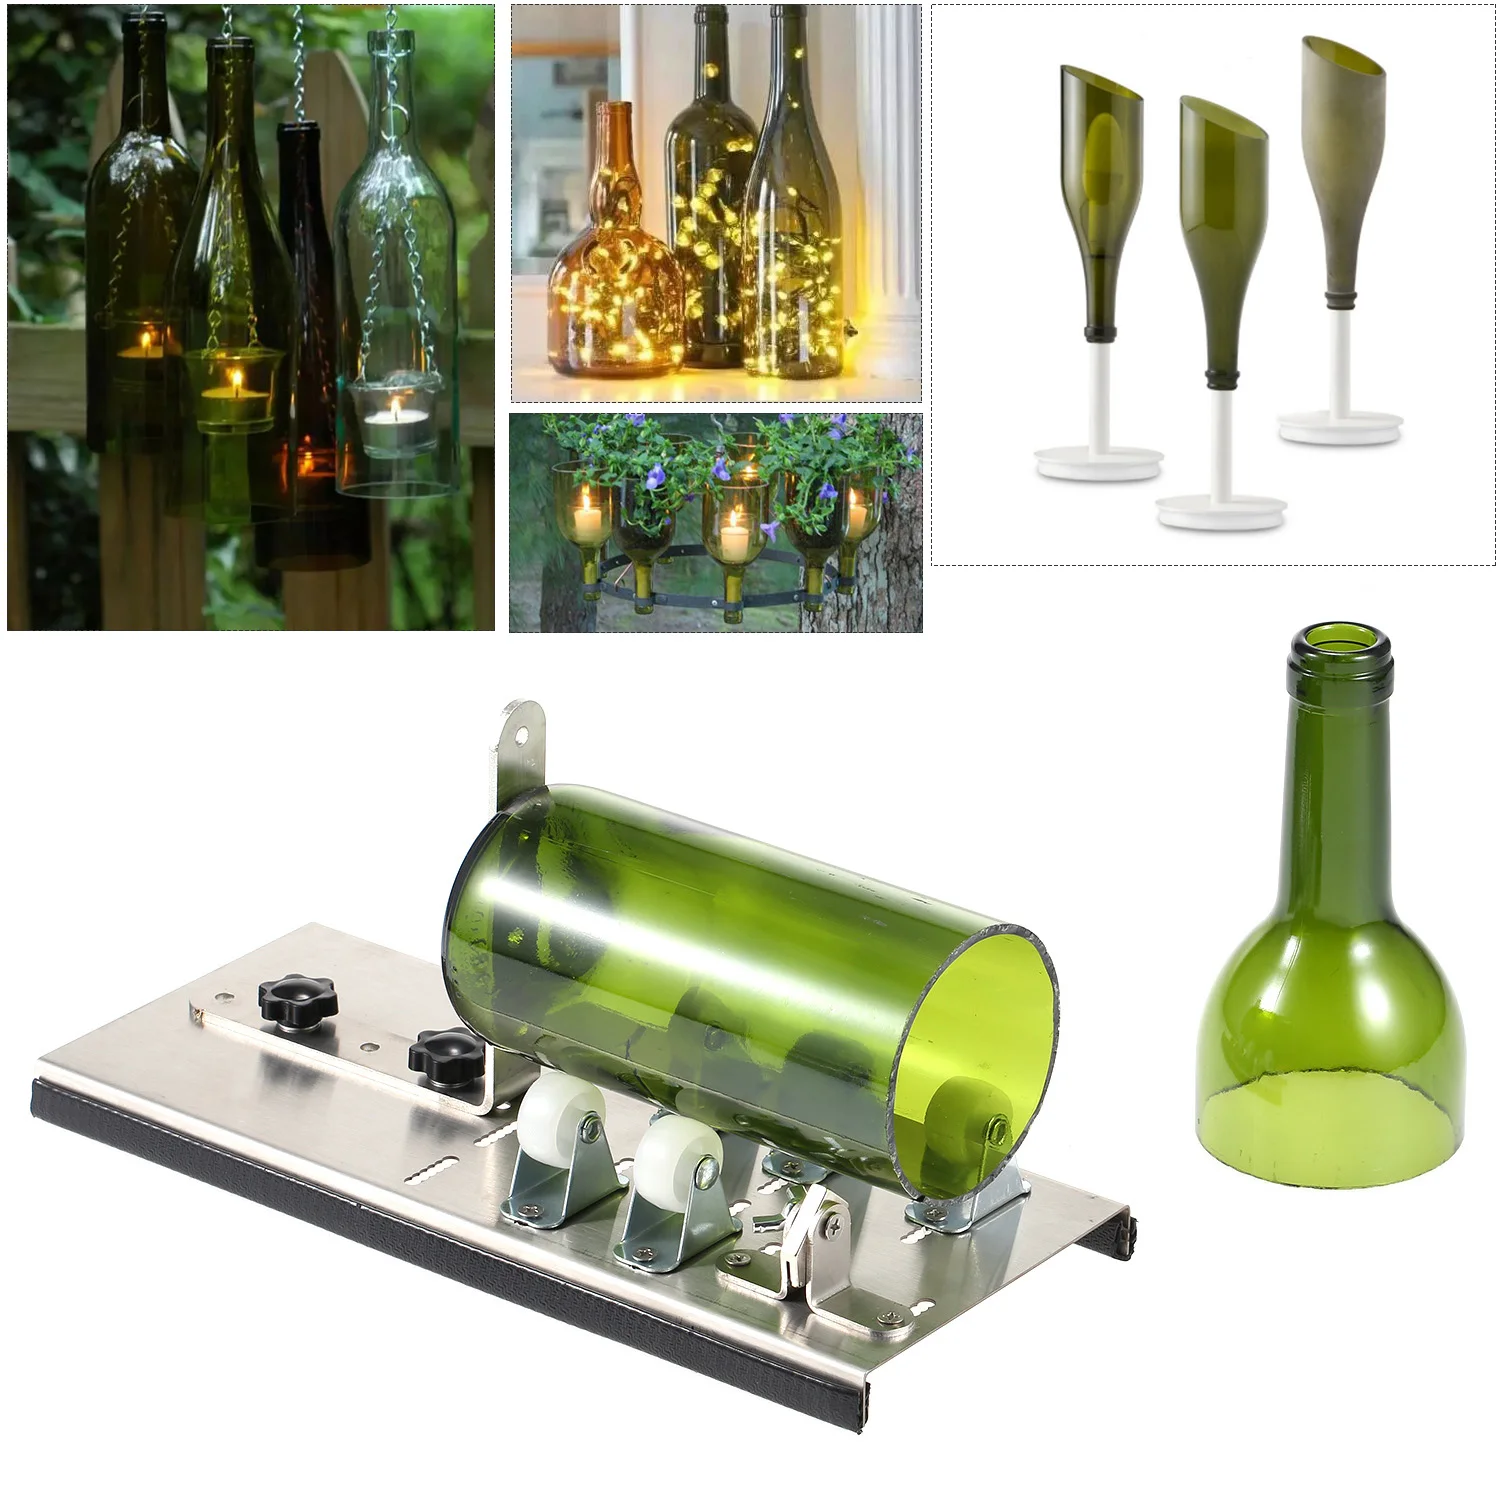 

High Quality Glass Bottle Cutter Stainless Steel DIY Tool Wine Beer Bottles Crafts Five Wheels Cutting Machine